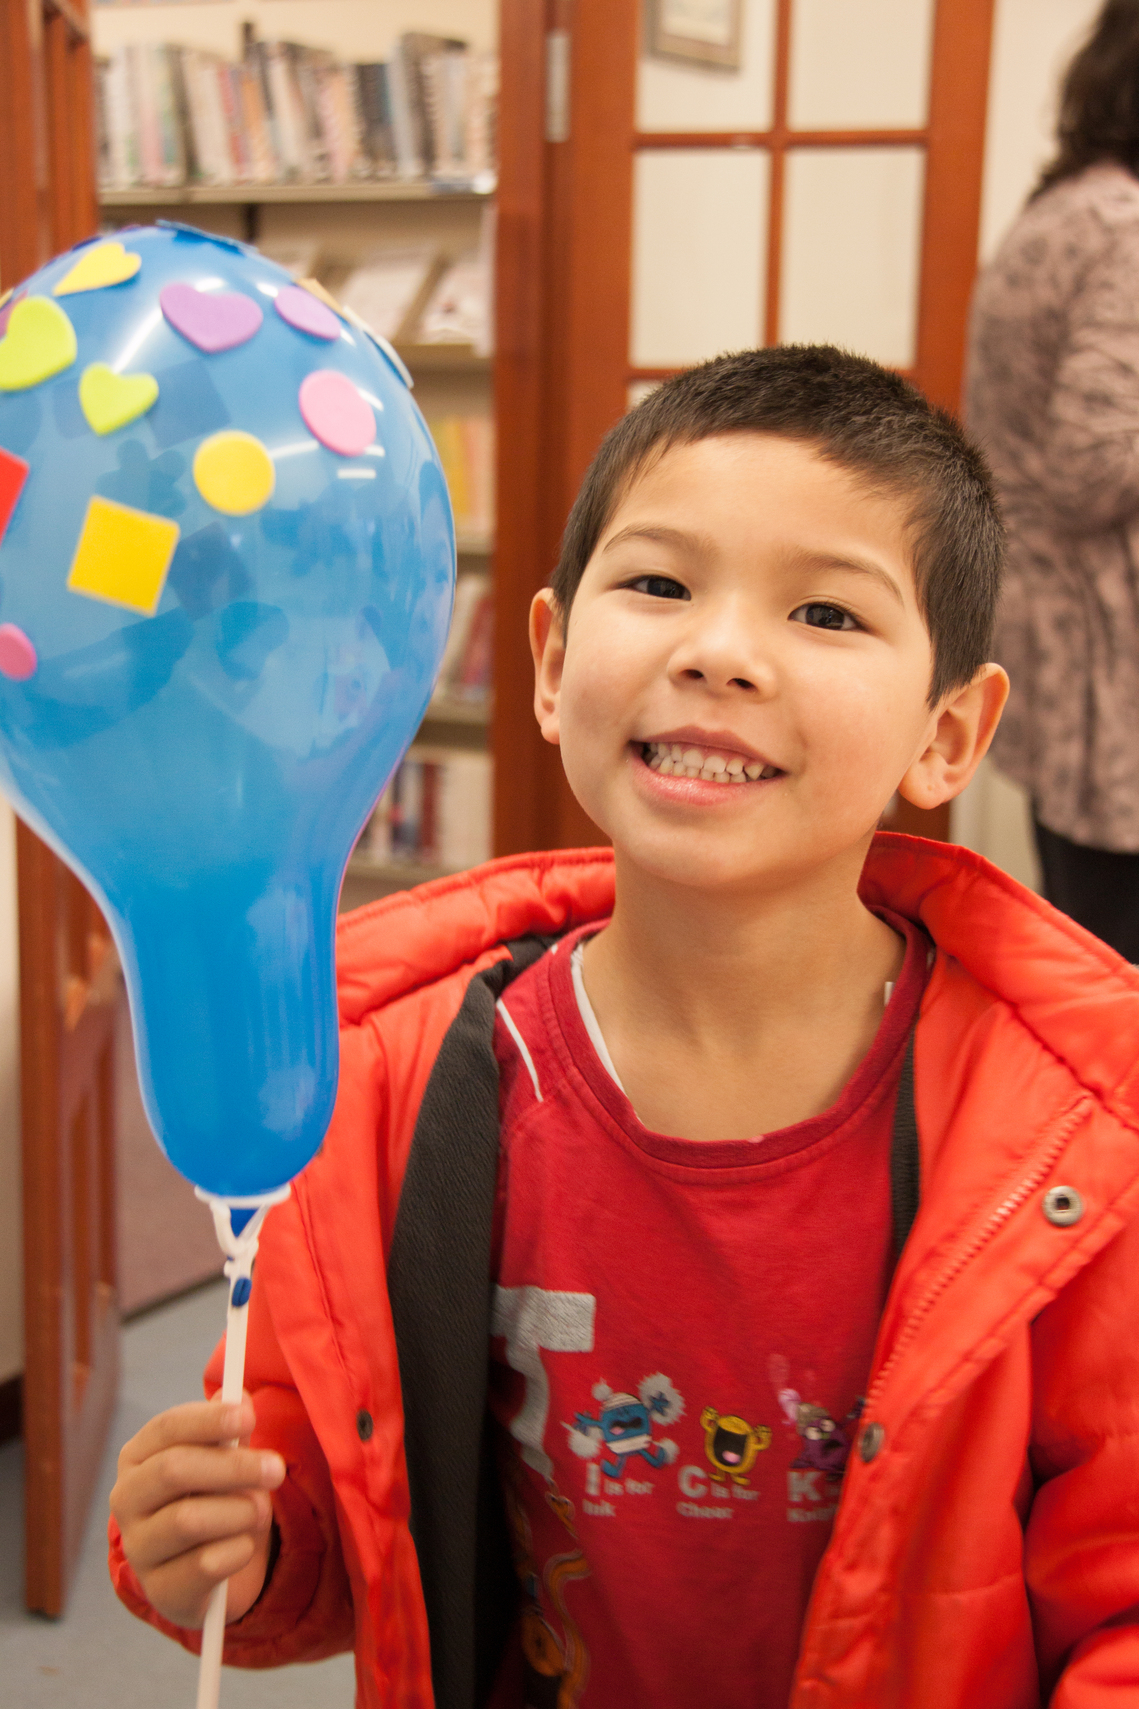 Alex Eaves holding a decorated balloon Feb 2016